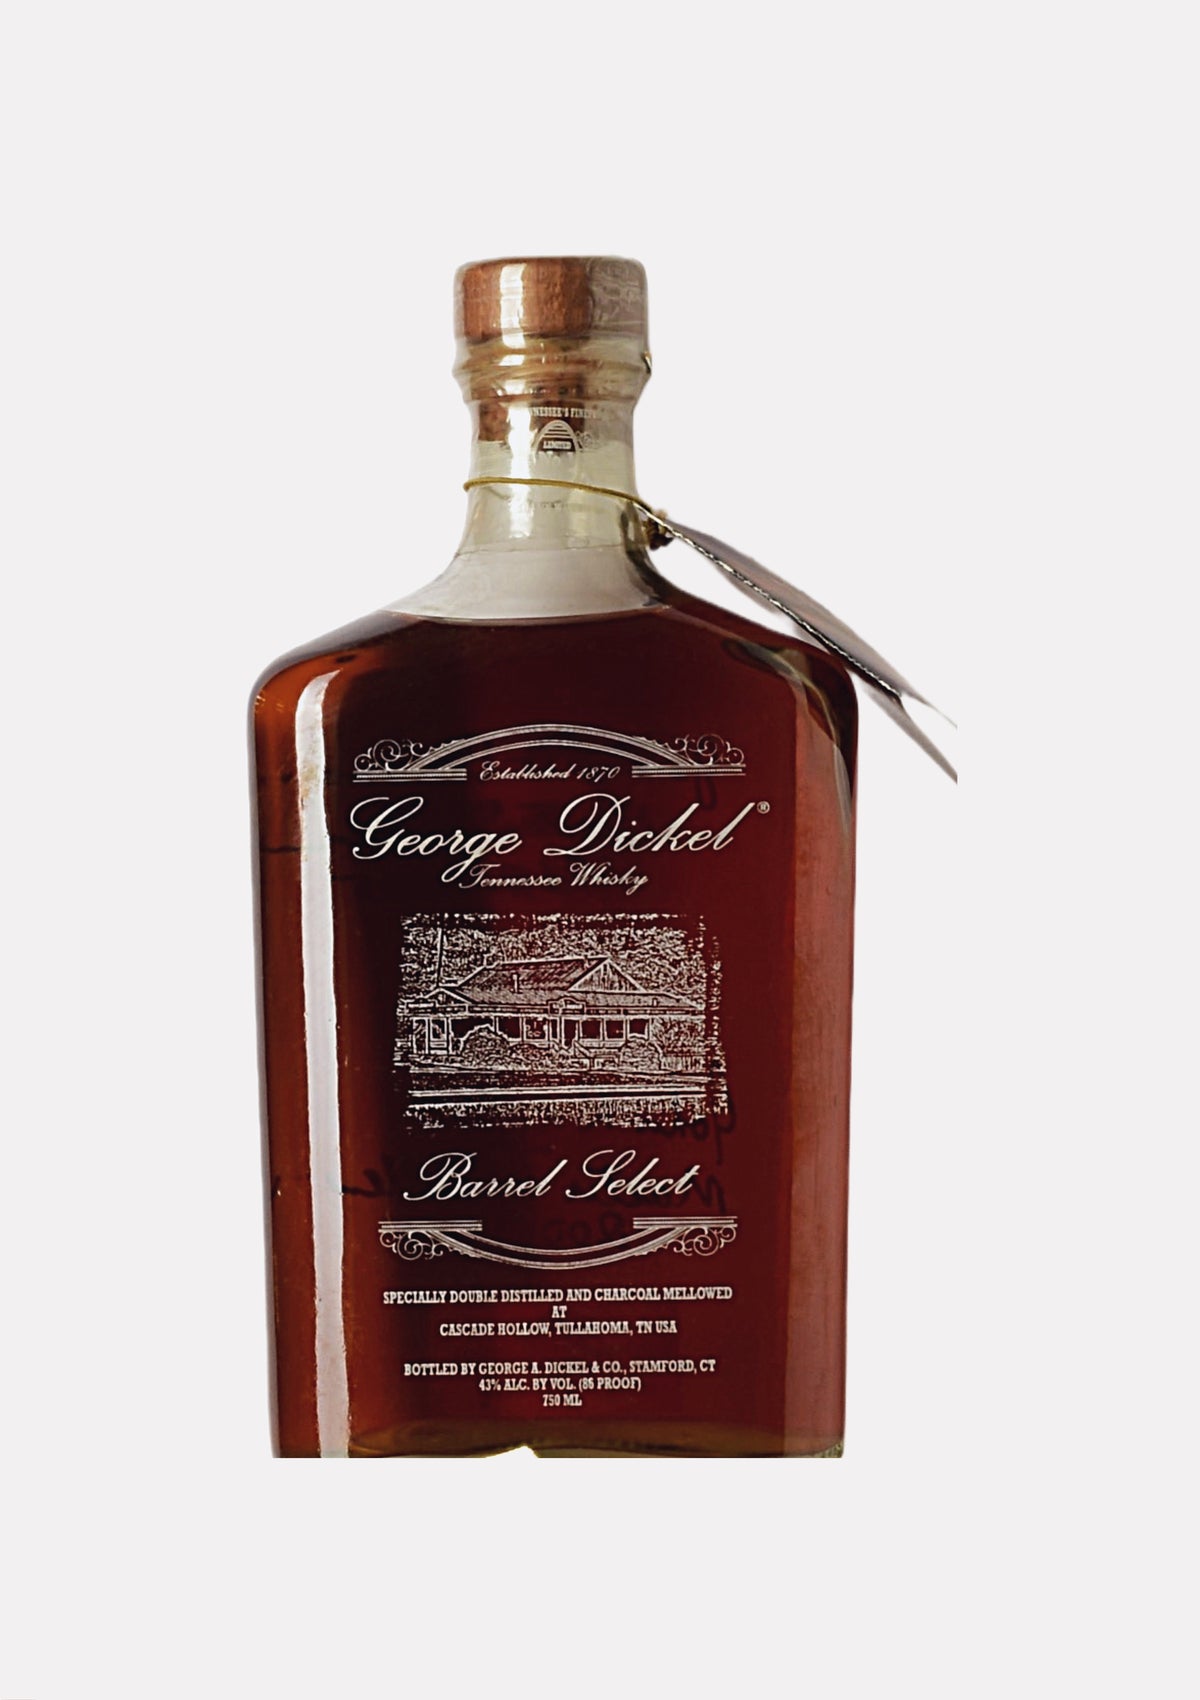 George Dickel Tennessee Whisky Barrel Select